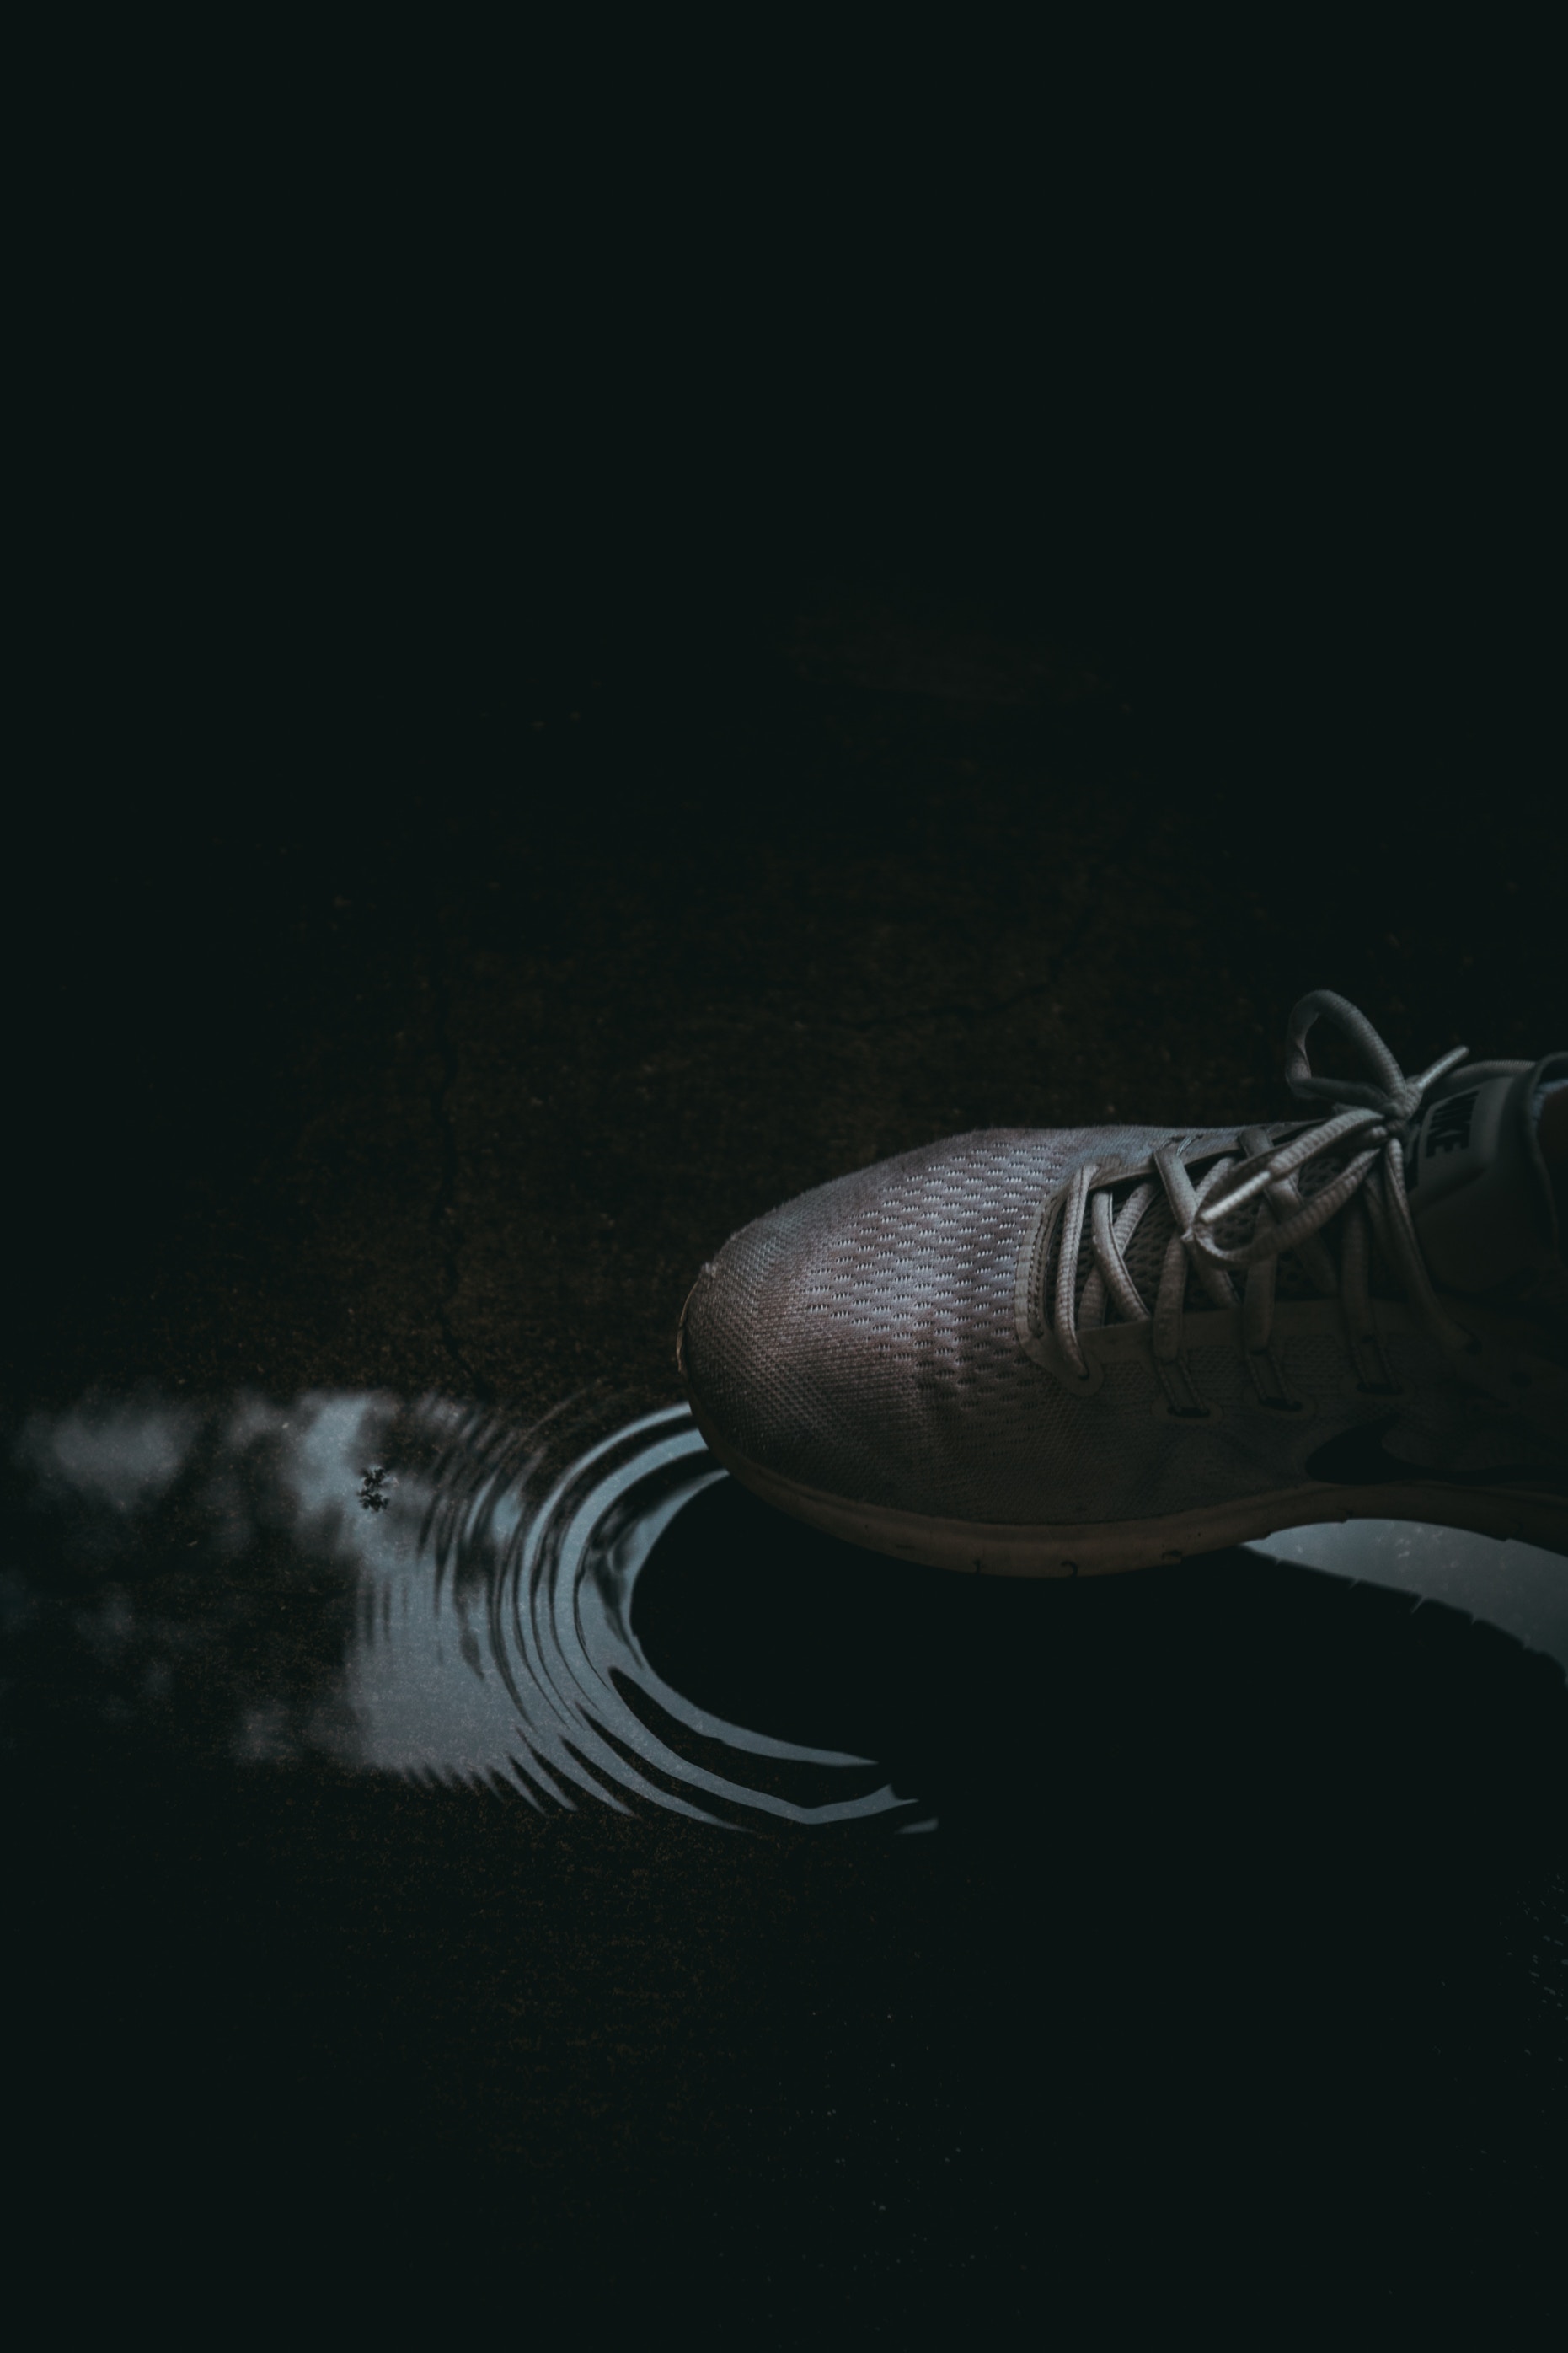 Free Images touching, sneaker, touch, puddle Dark